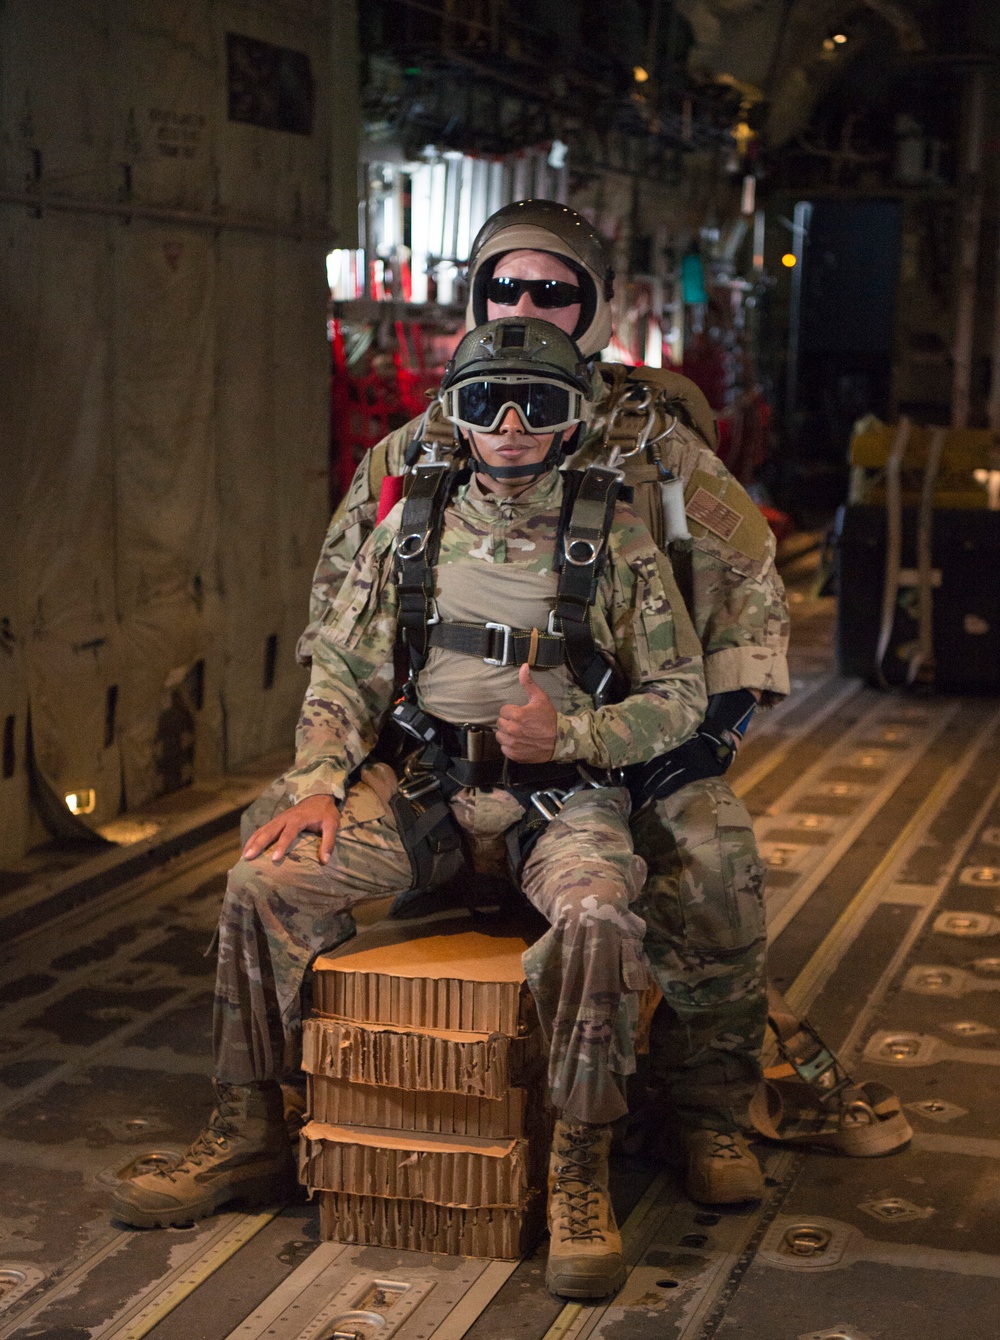 82nd ERQS and 75th EAS Perform Halo Jump